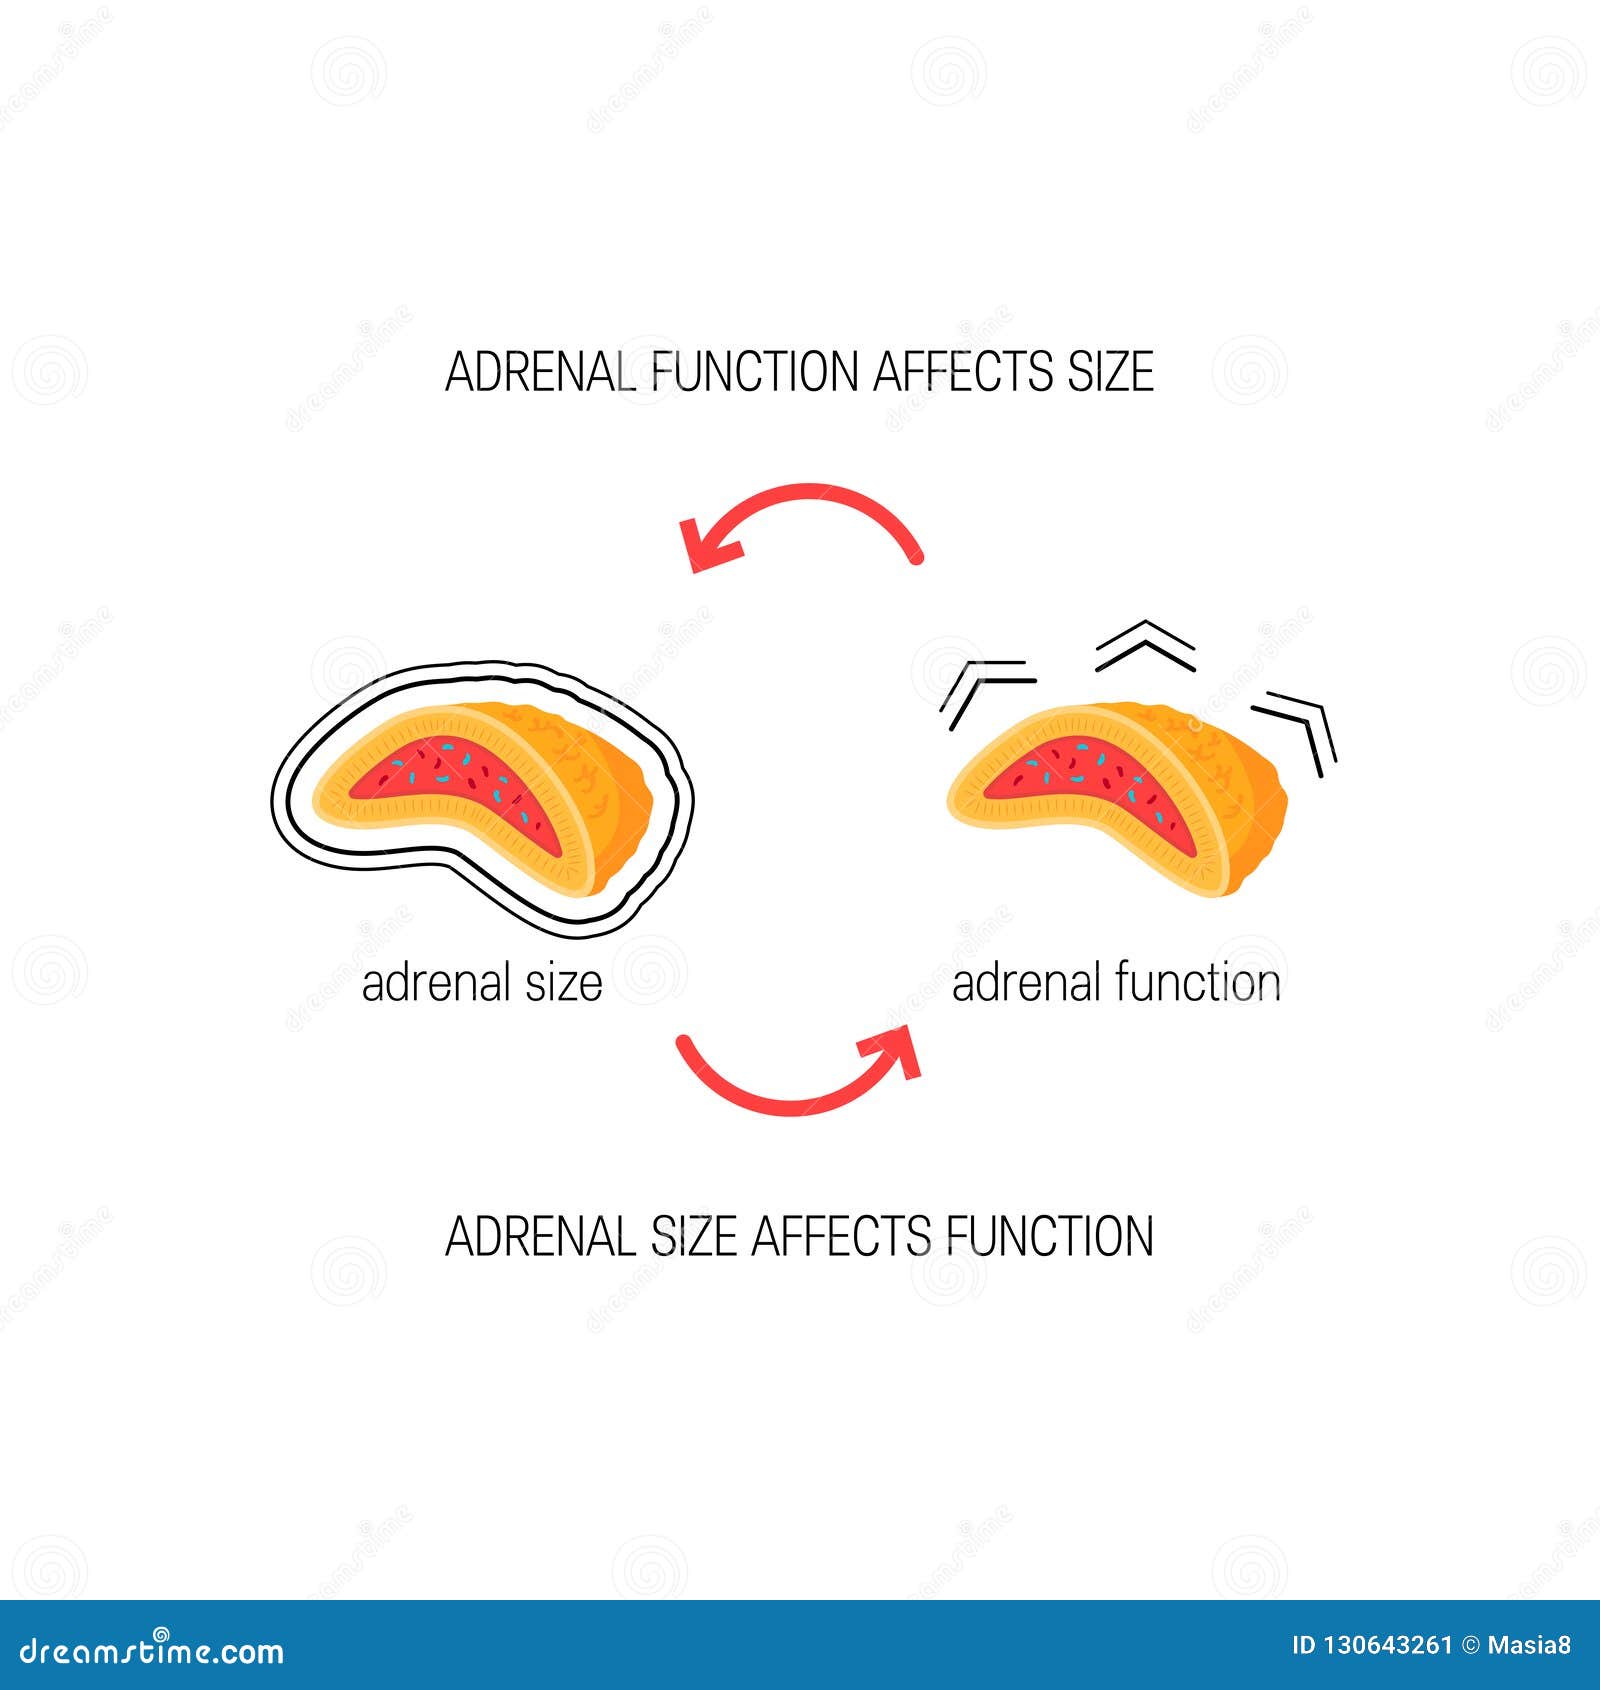 primary function of the adrenal gland